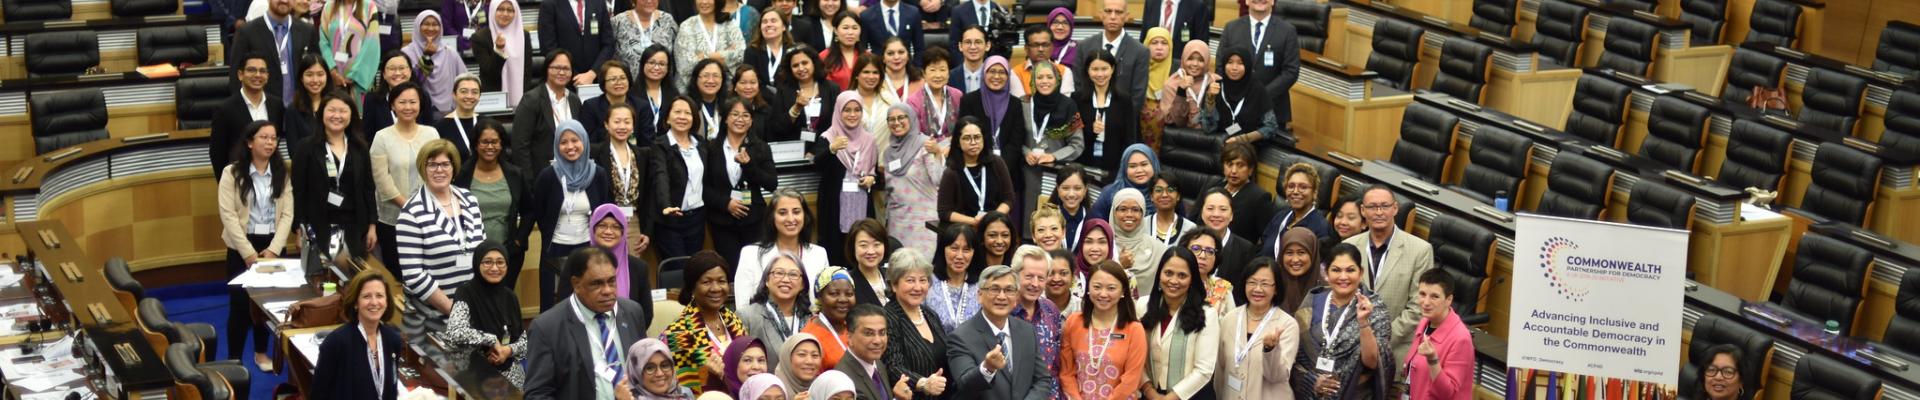 Group short shot of participants in the Commonwealth Partnership for Democracy #WomenWhoLead conference in Malaysia February 2019